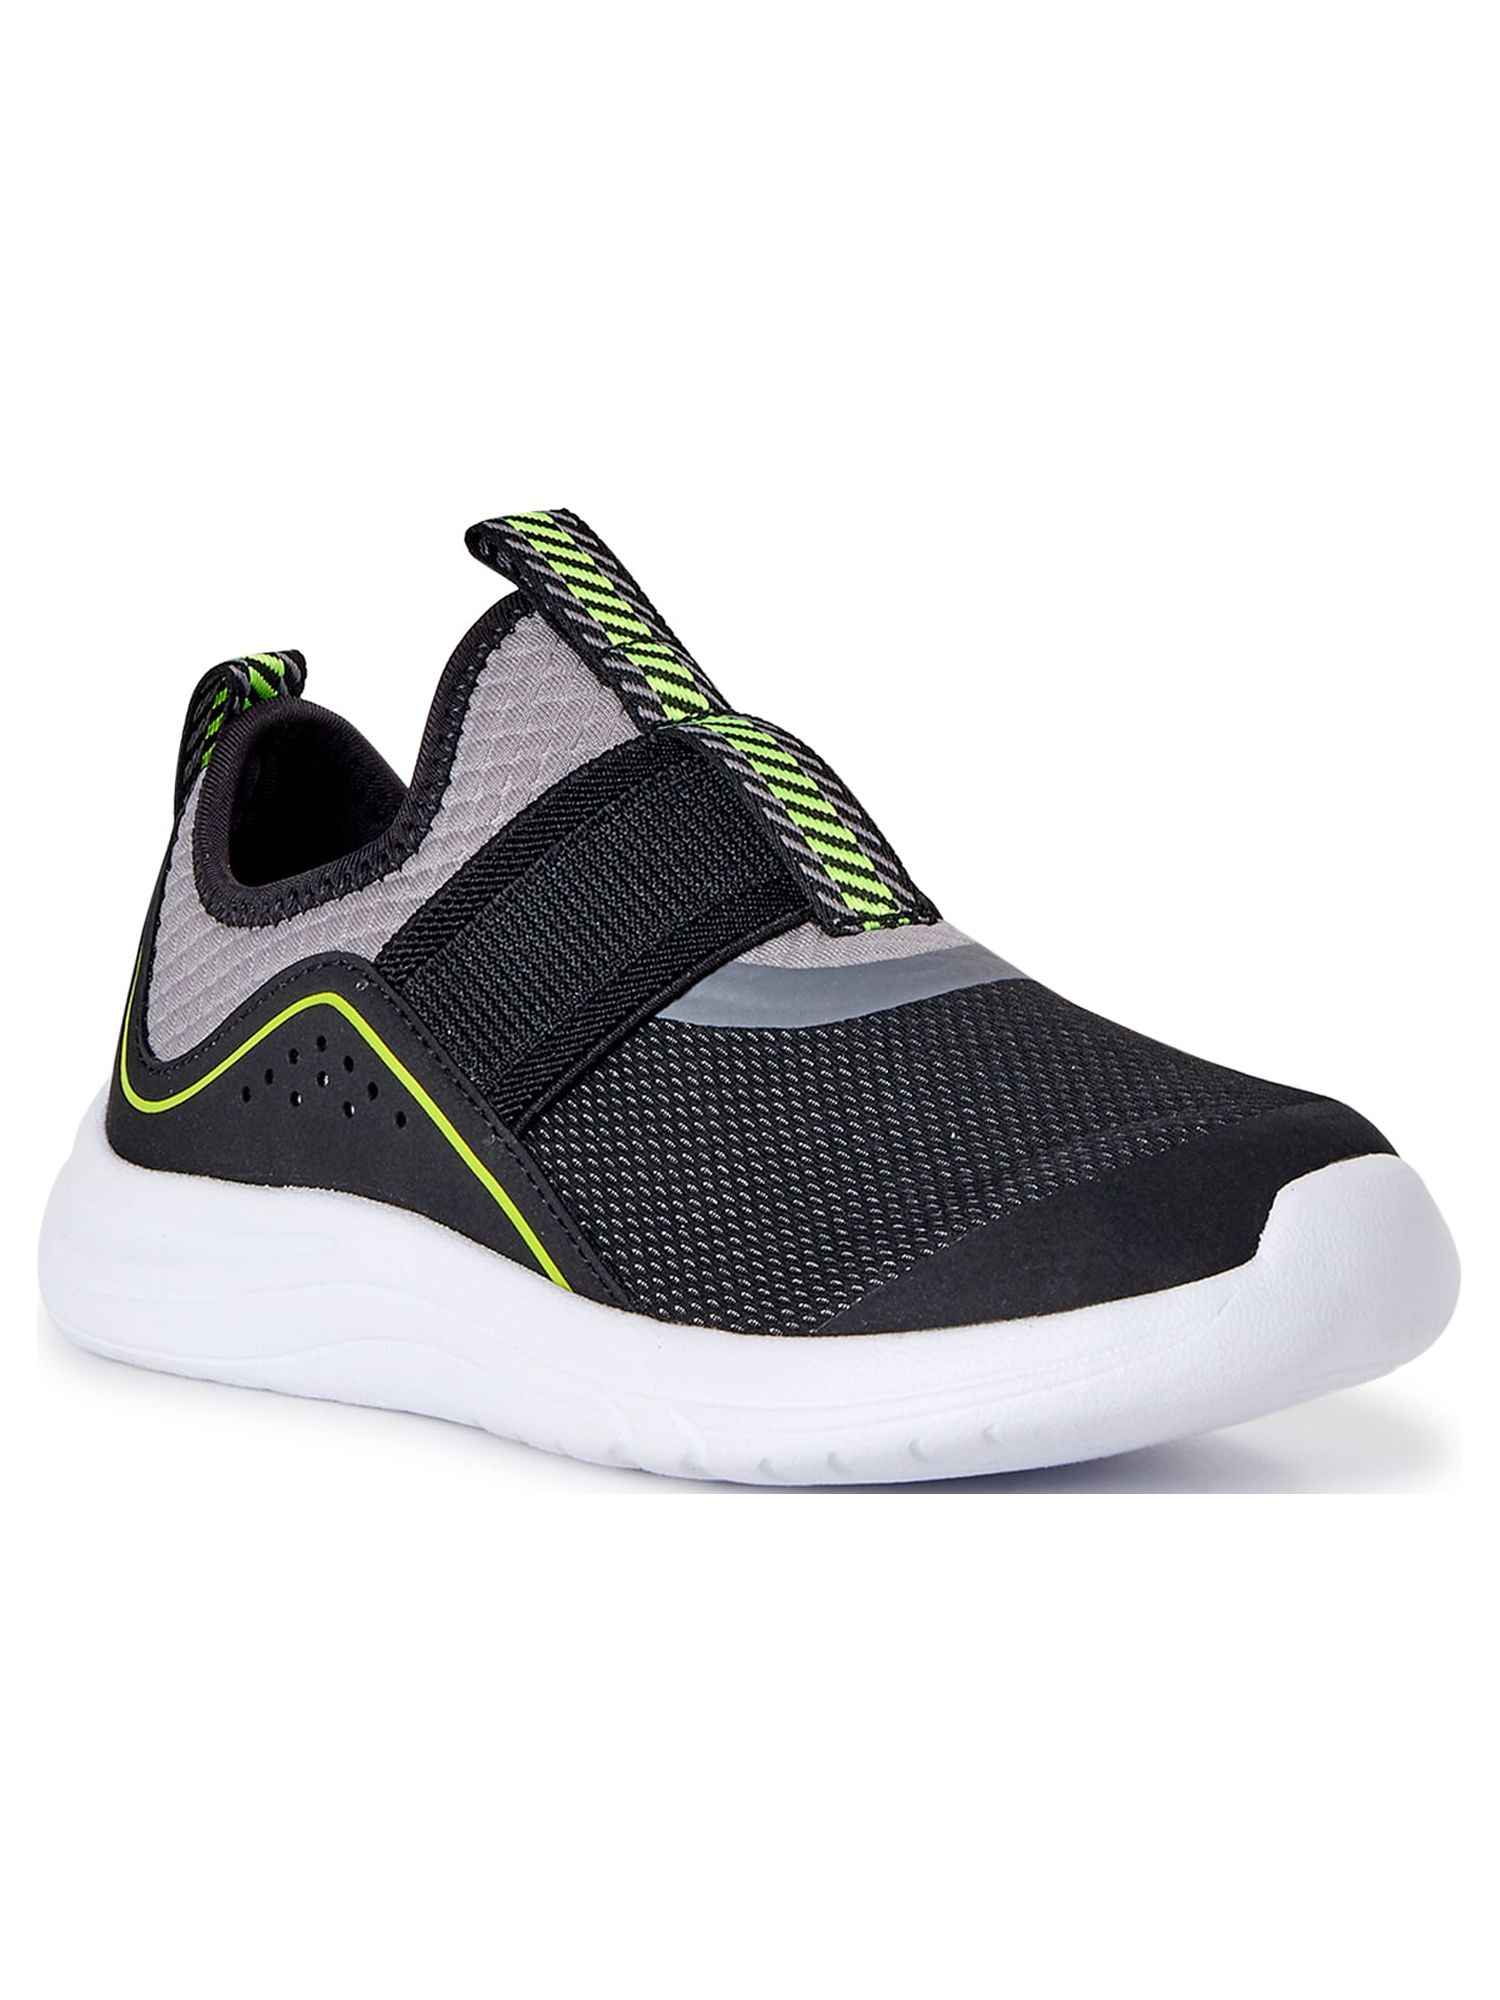 Athletic Works Little and Big Boys Slip-On Athletic Sneakers, Sizes 13-6 - image 1 of 3